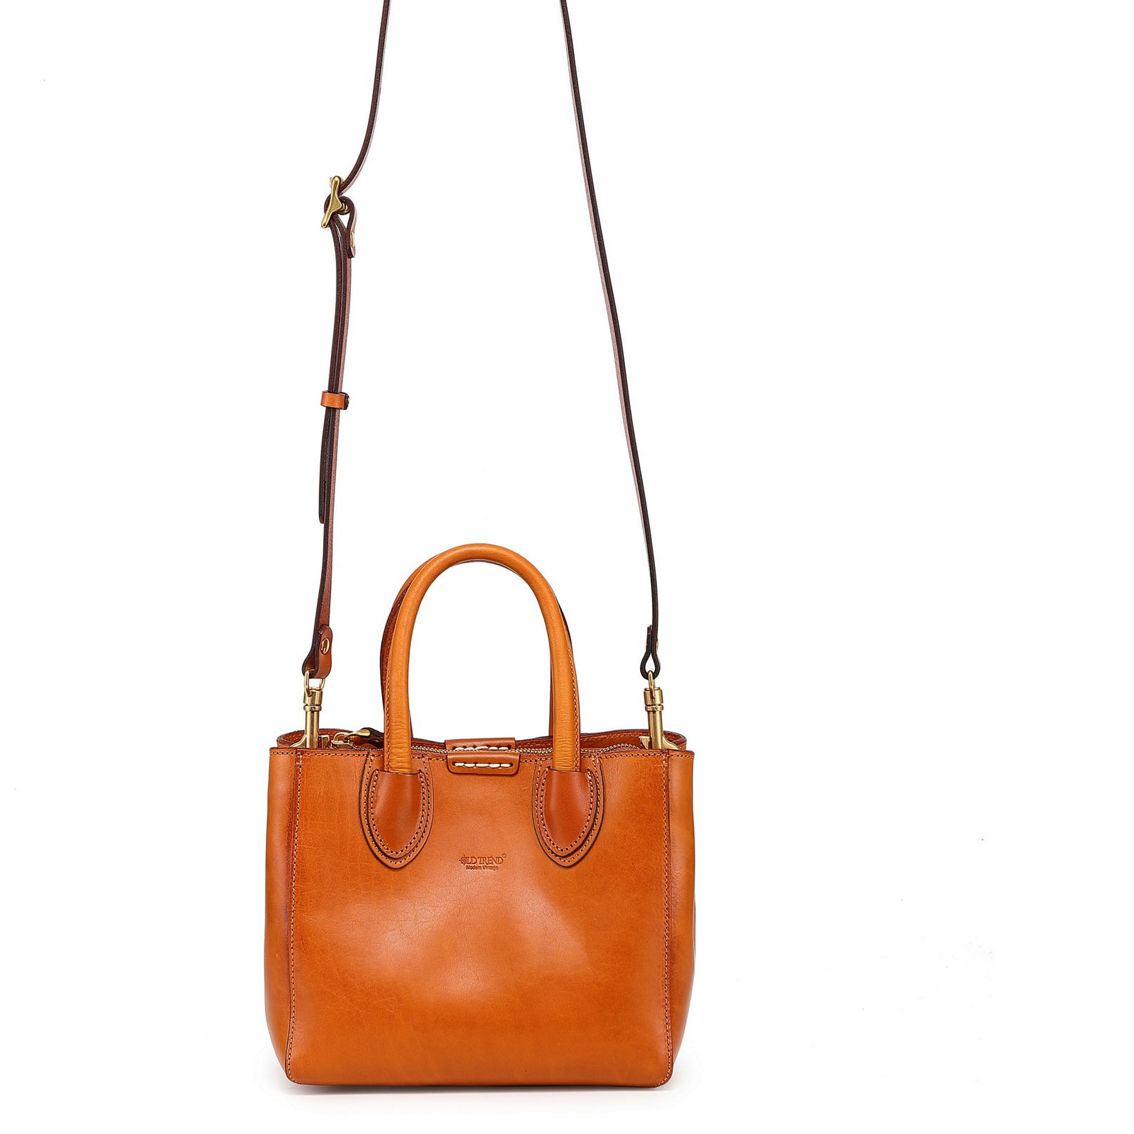 Old Trend Dahlia Convertible Leather Mini Tote - Image 2 of 5